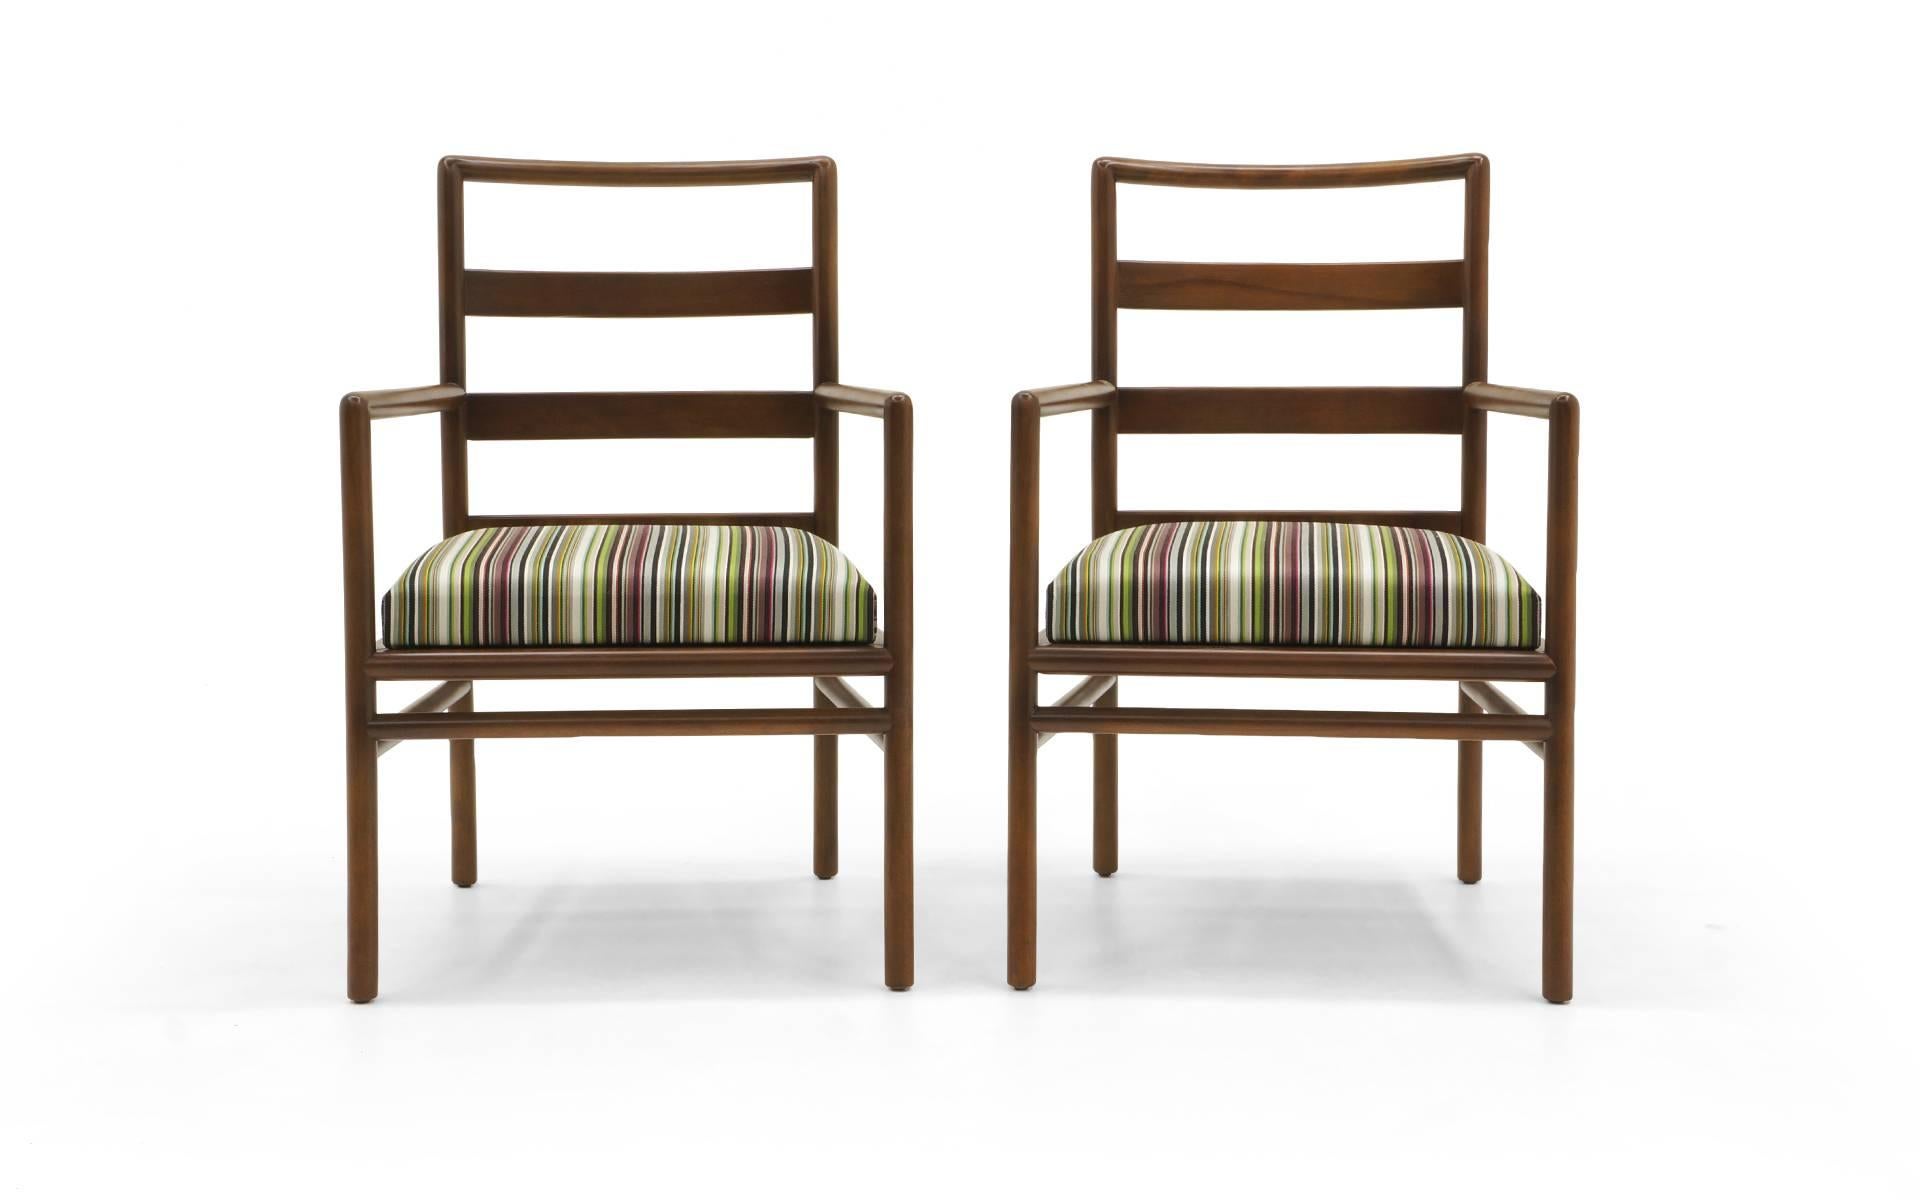 American Twelve Robsjohn-Gibbings for Widdicomb Dining Chairs, 10 Armless and 2 Armchairs